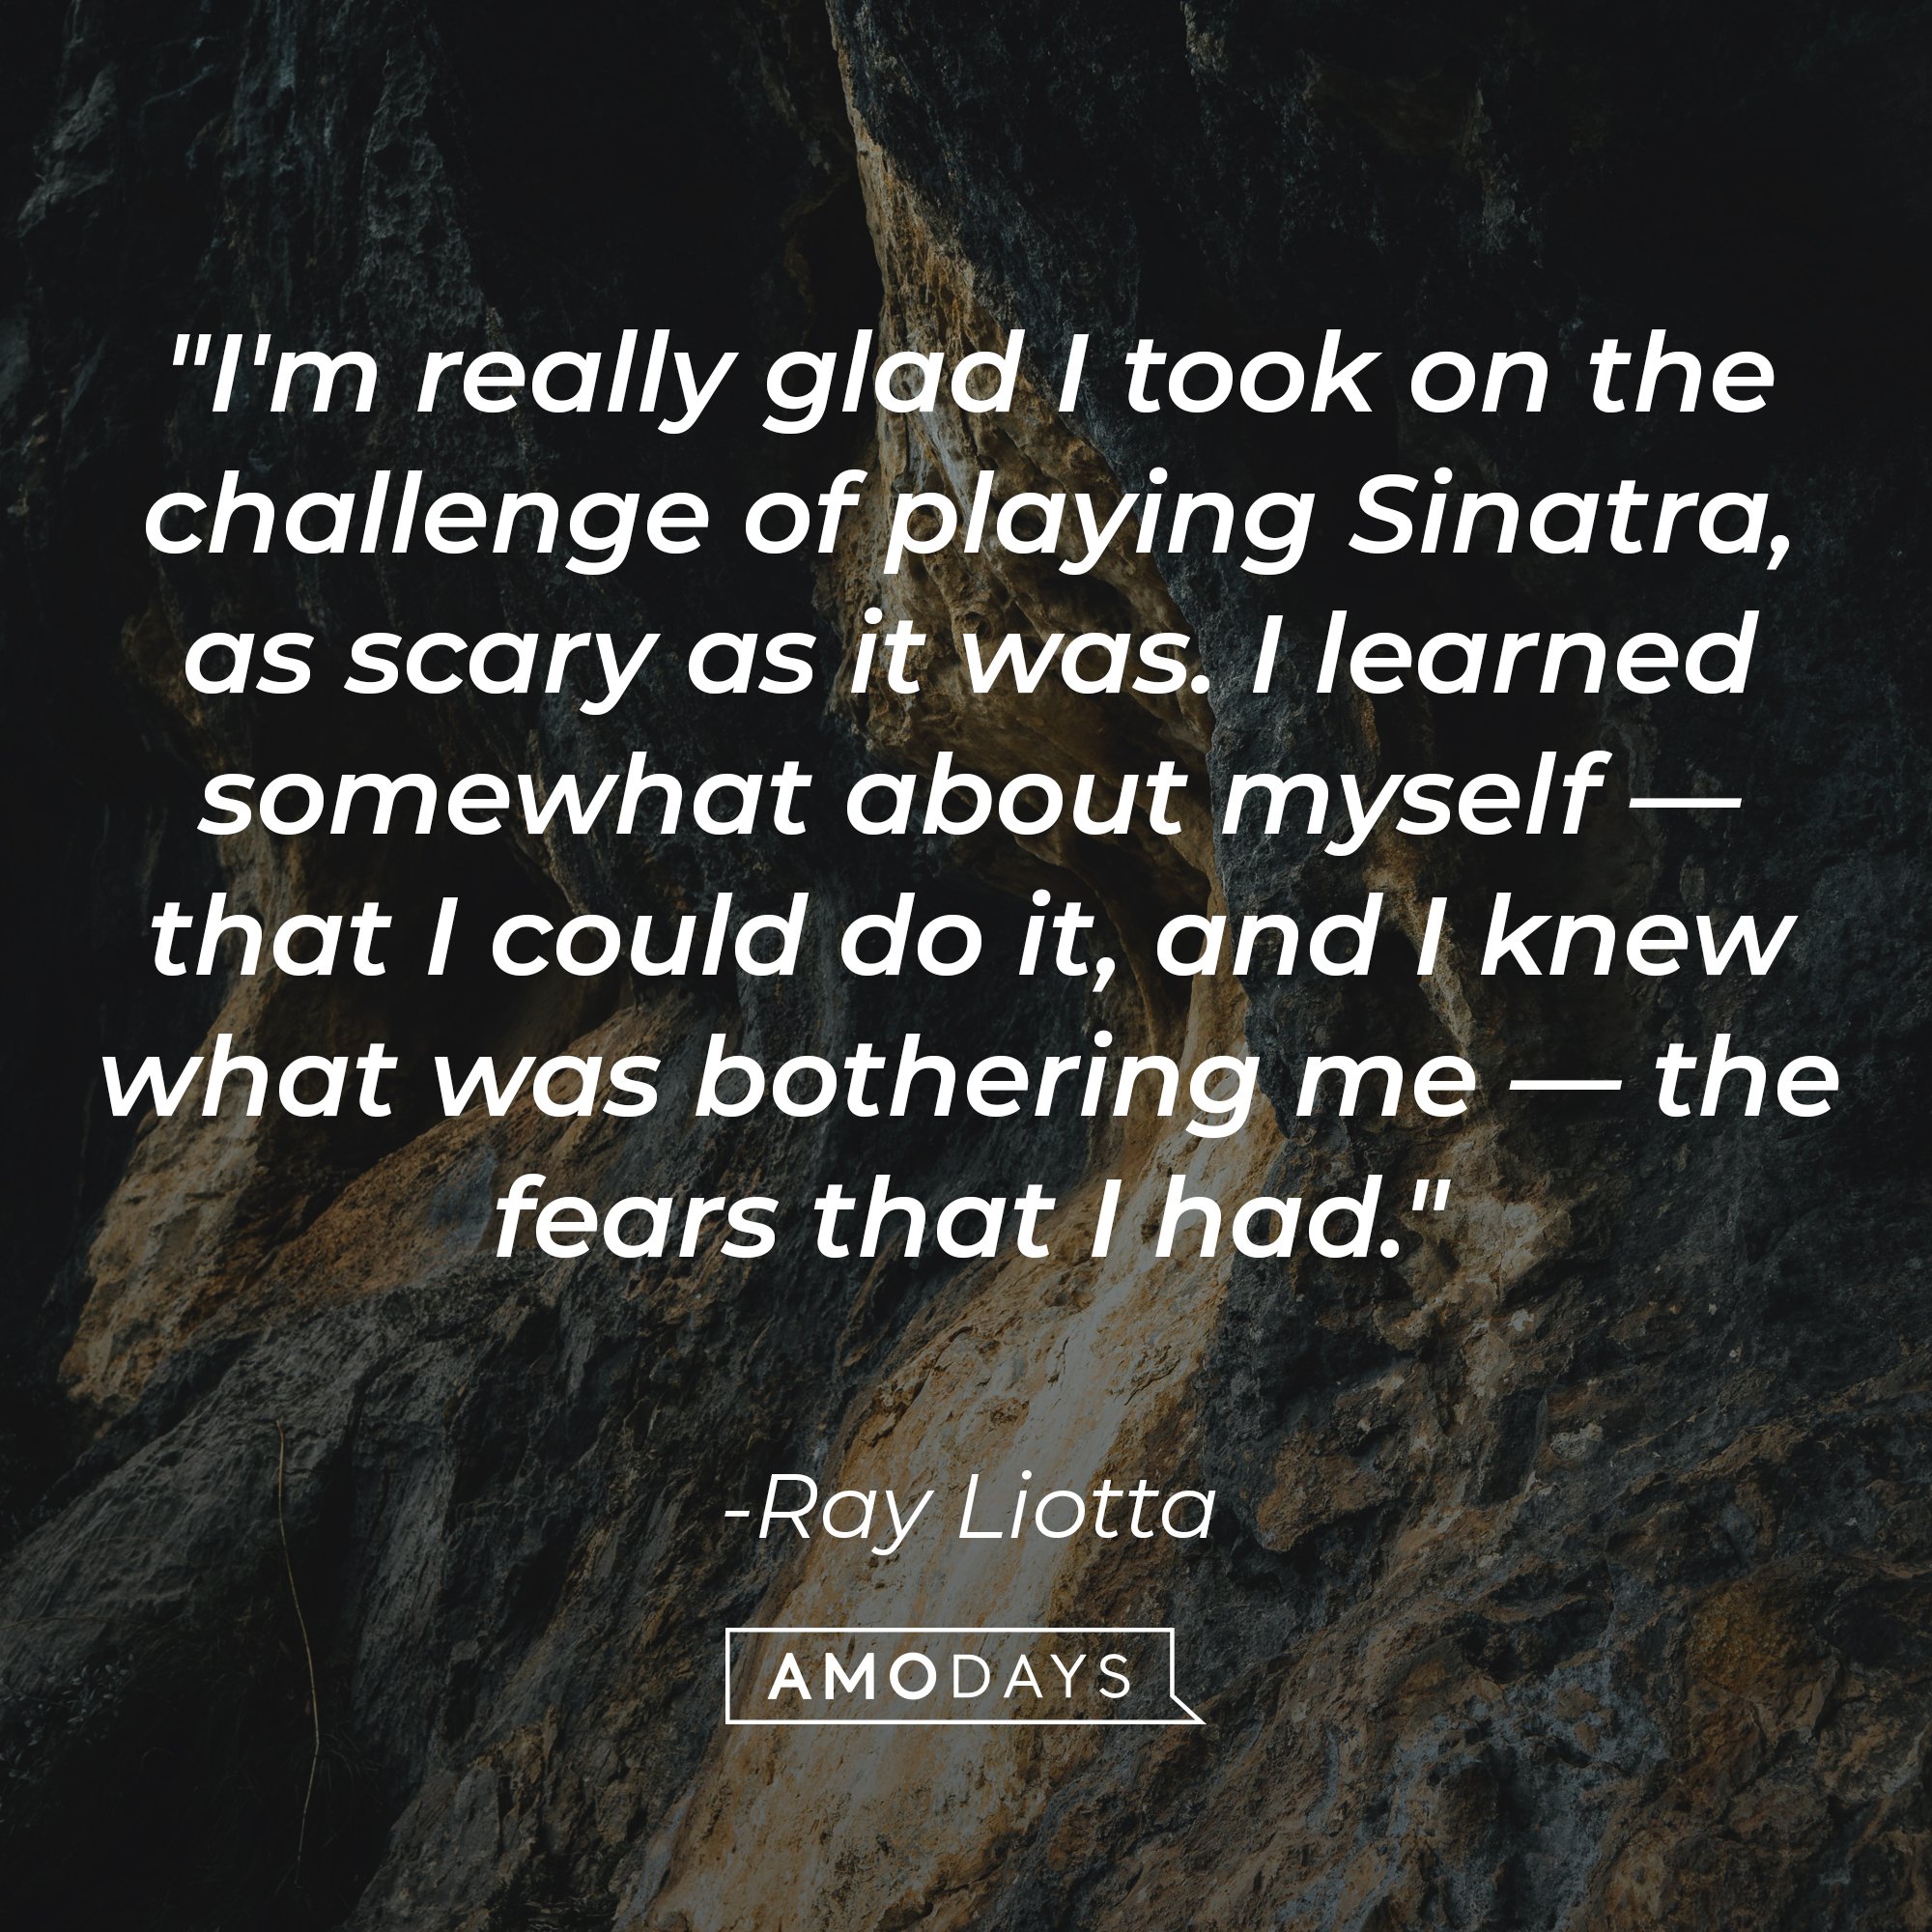 Ray Liotta’s quote: "I'm really glad I took on the challenge of playing Sinatra, as scary as it was. I learned somewhat about myself — that I could do it, and I knew what was bothering me — the fears that I had." | Image: AmoDays